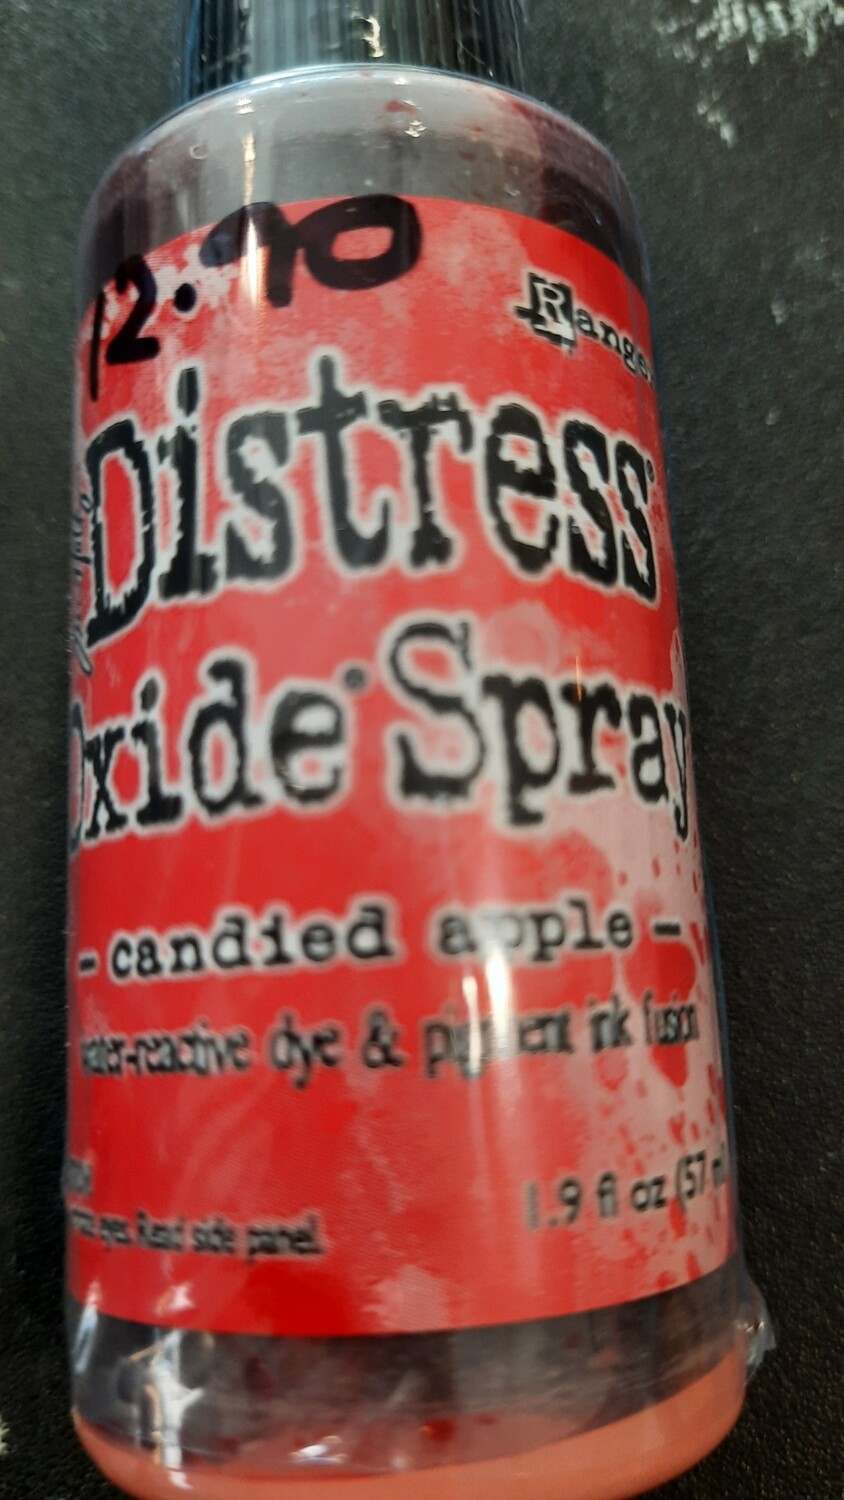 Distress Oxide Spray candied Apple